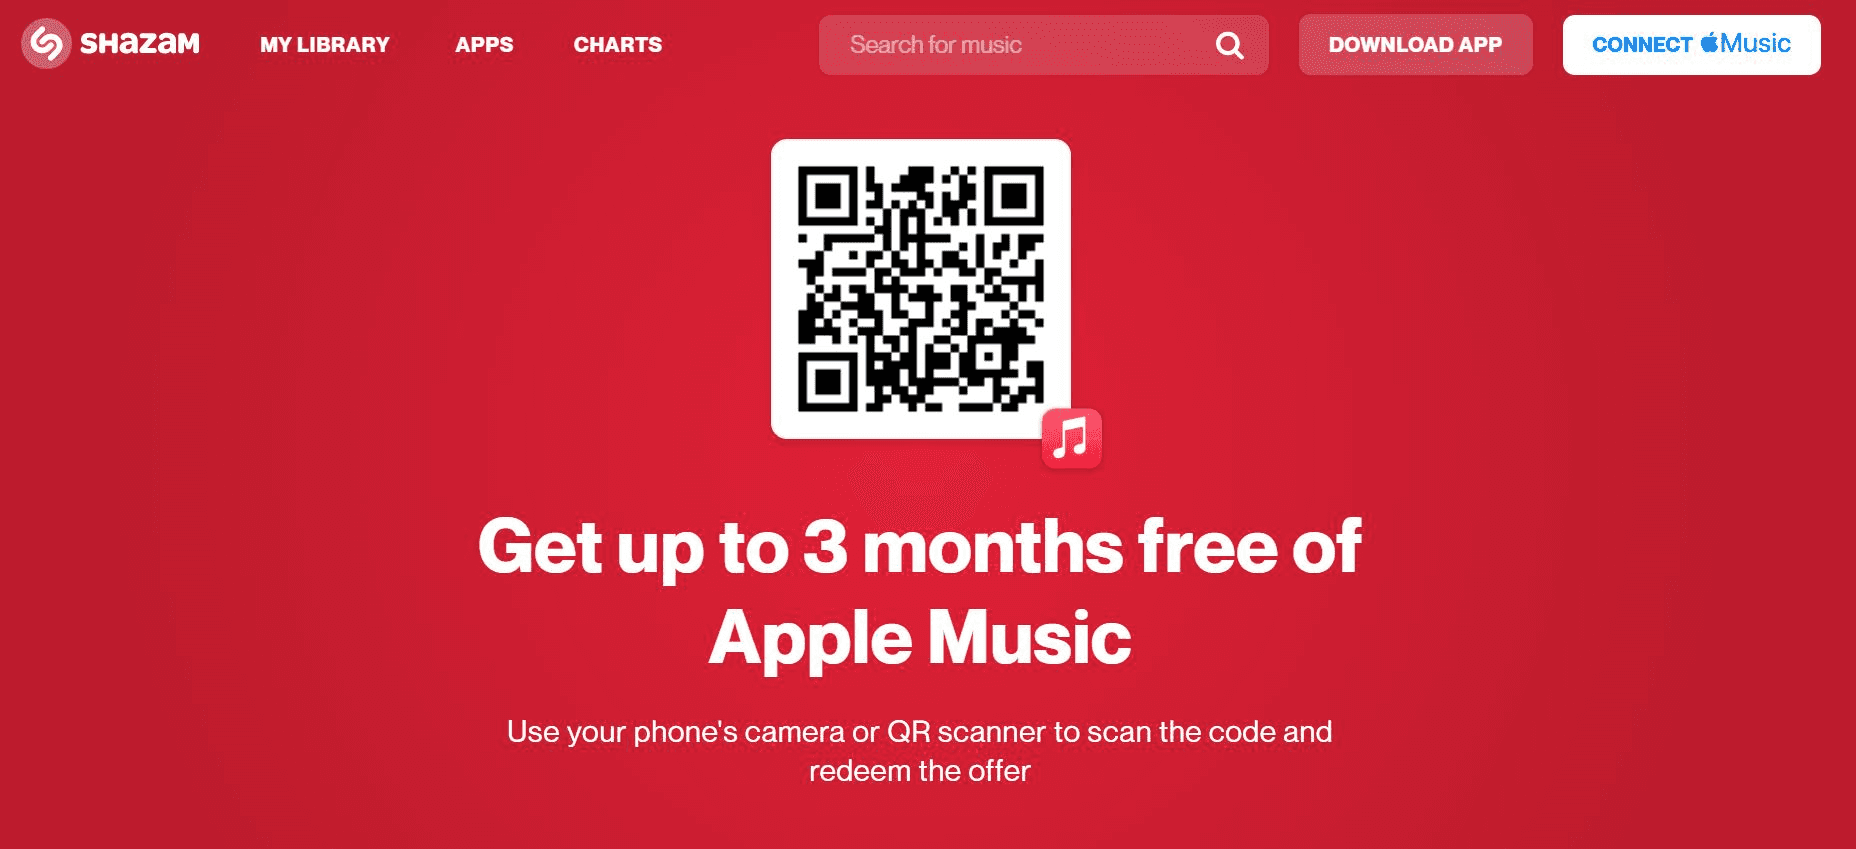 3 months free with Shazam.